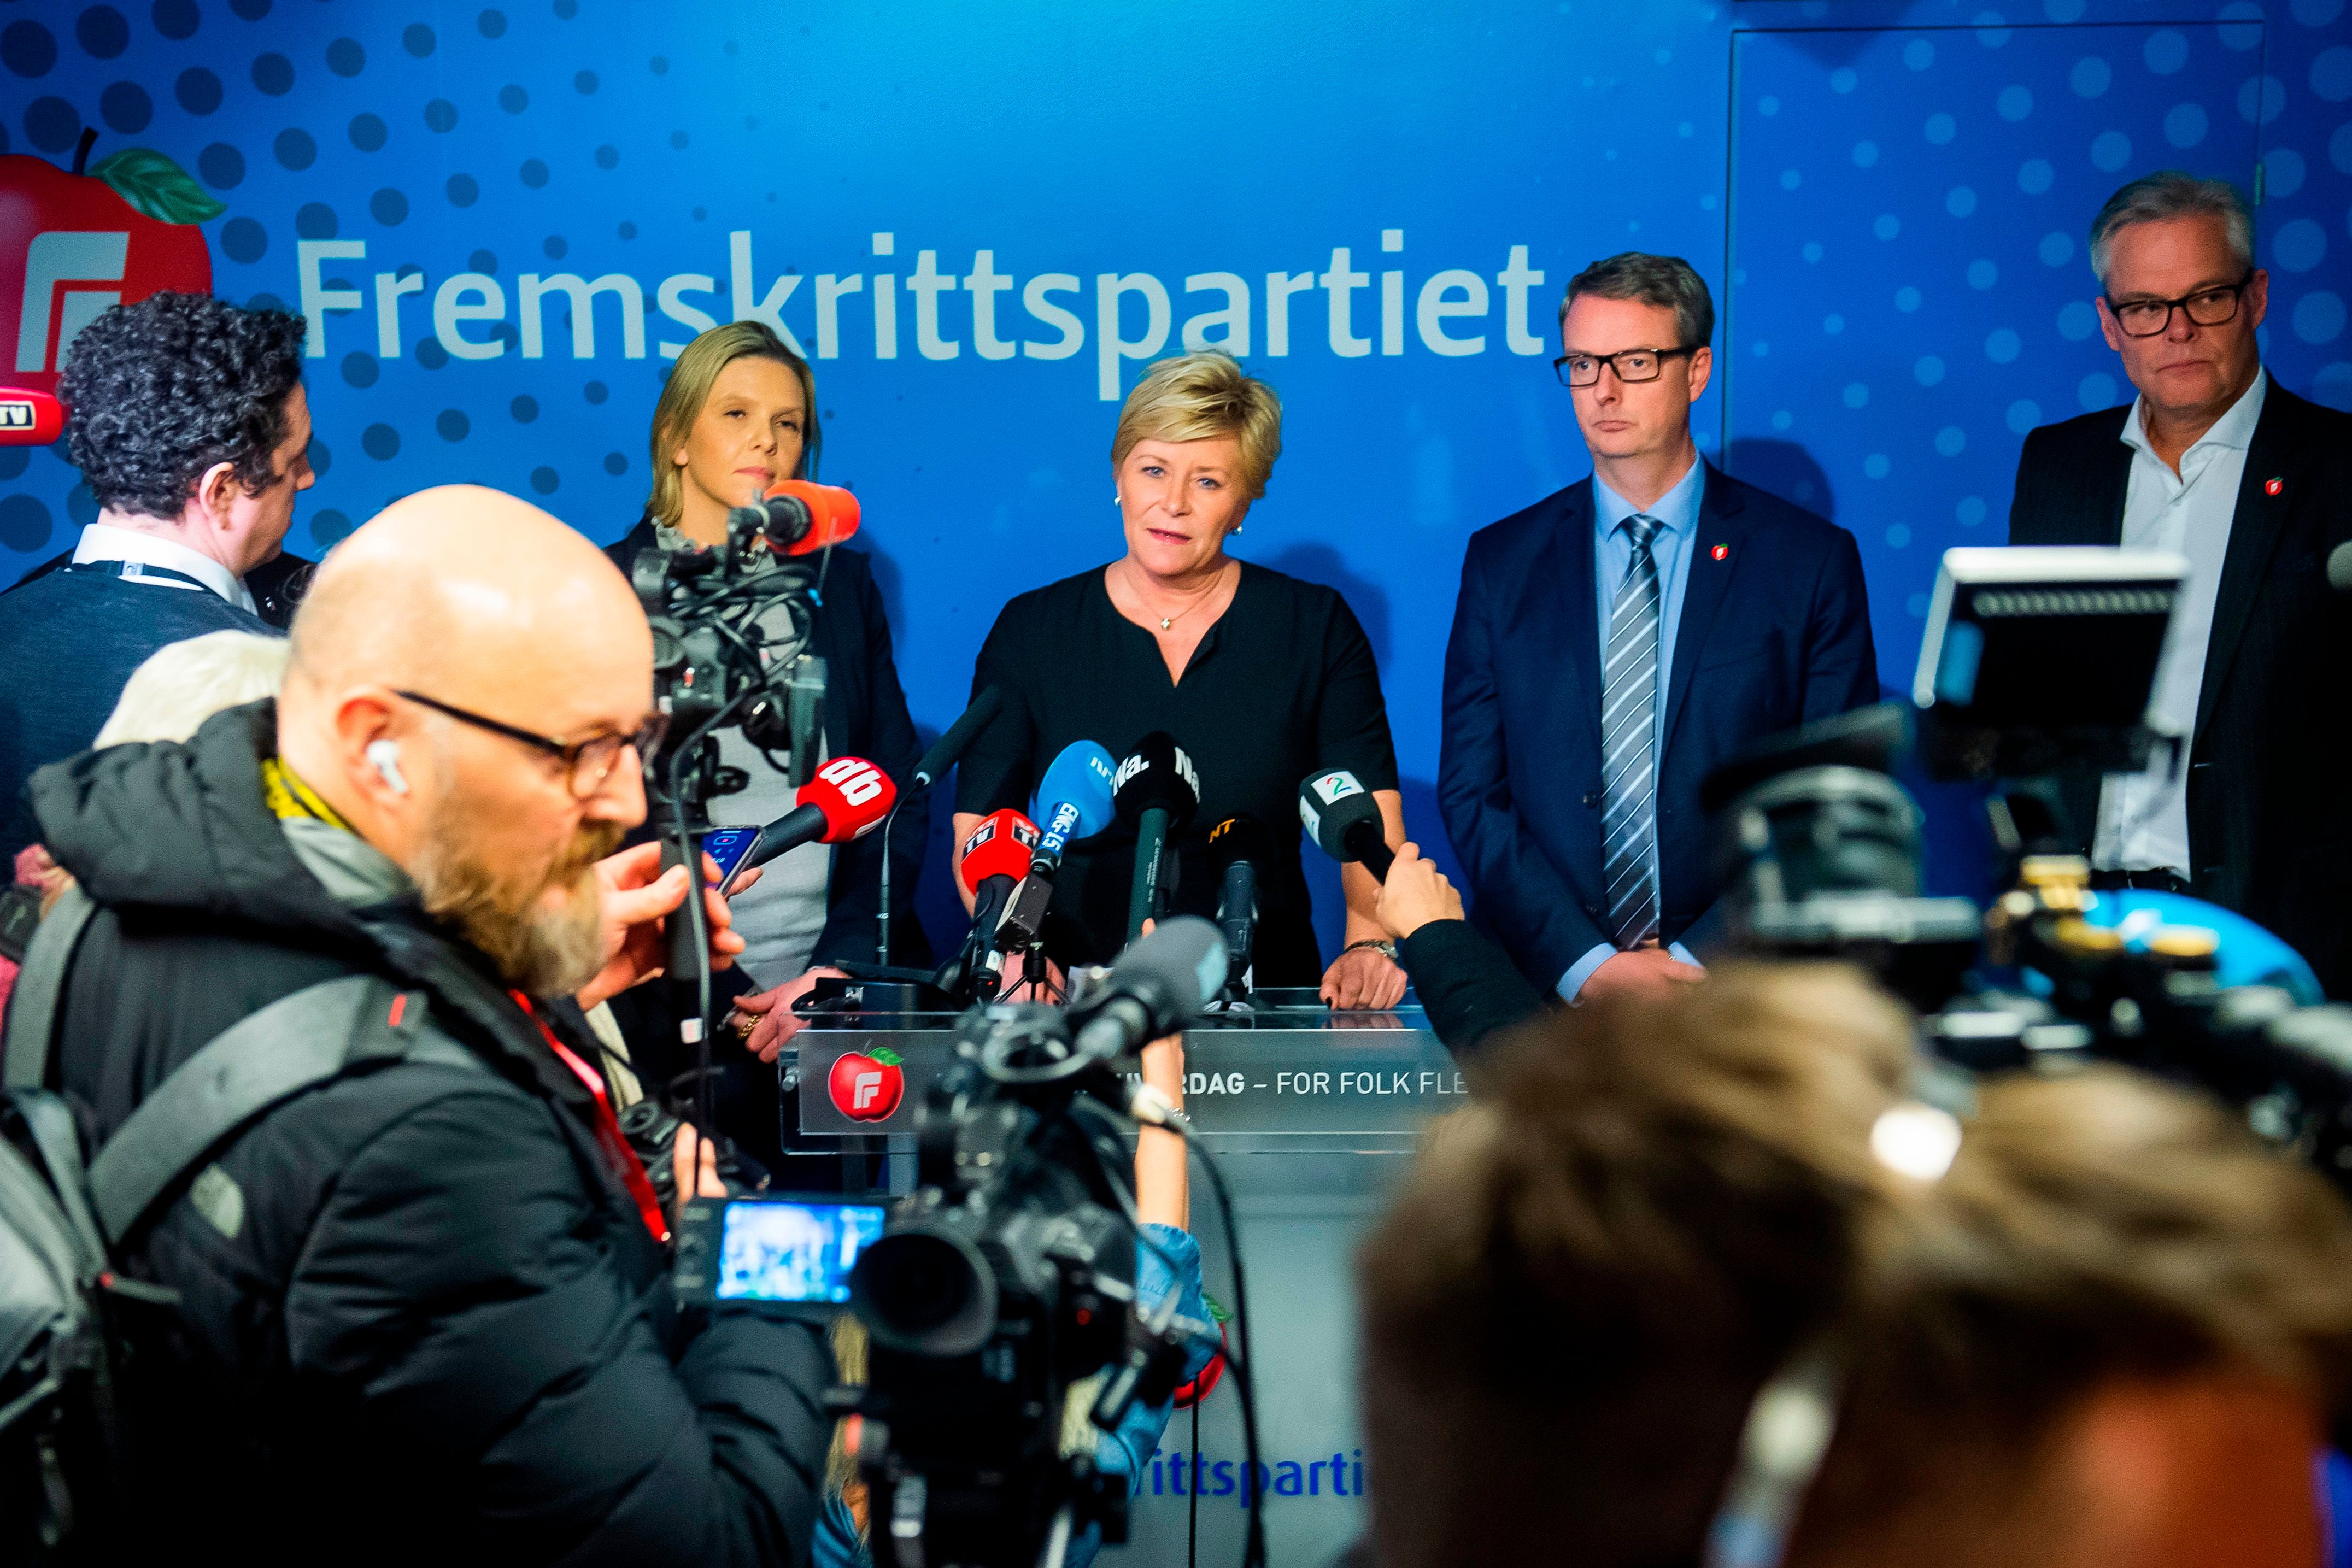 Former leader of the Progress Party Siv Jensen announces her party is leaving the right-wing coalition government in January 2020